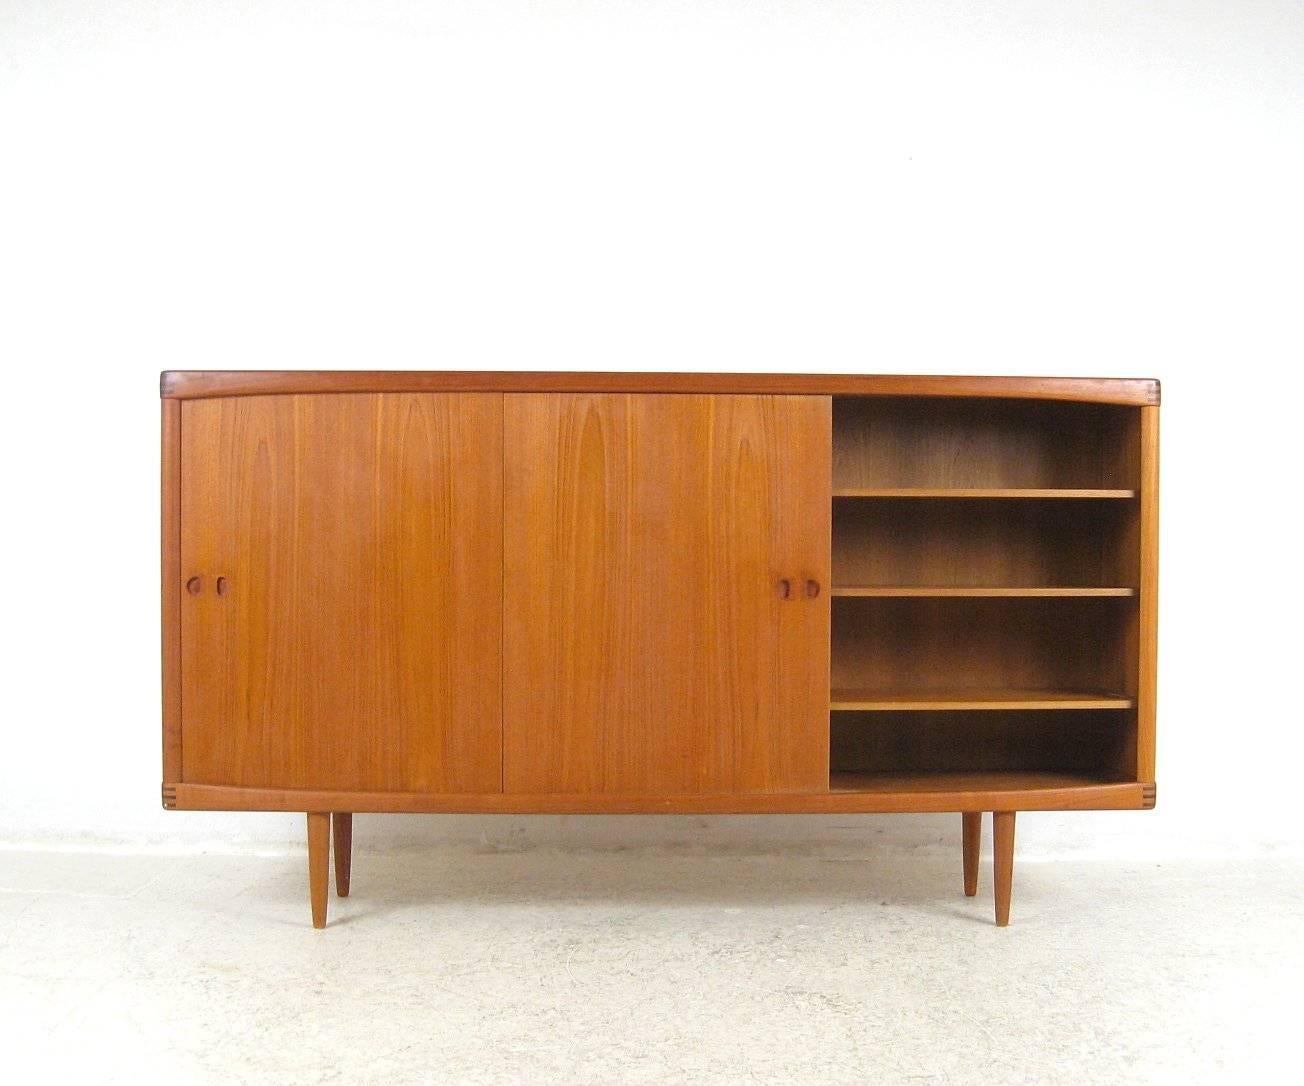 This teak sideboard was designed by H.W. Klein in the 1960s and manufactured by Bramin of Denmark. Made of teak heartwood, it comprises two cabinets behind a sliding door on each side and drawers in the centre. Above the drawers is a pull-down door